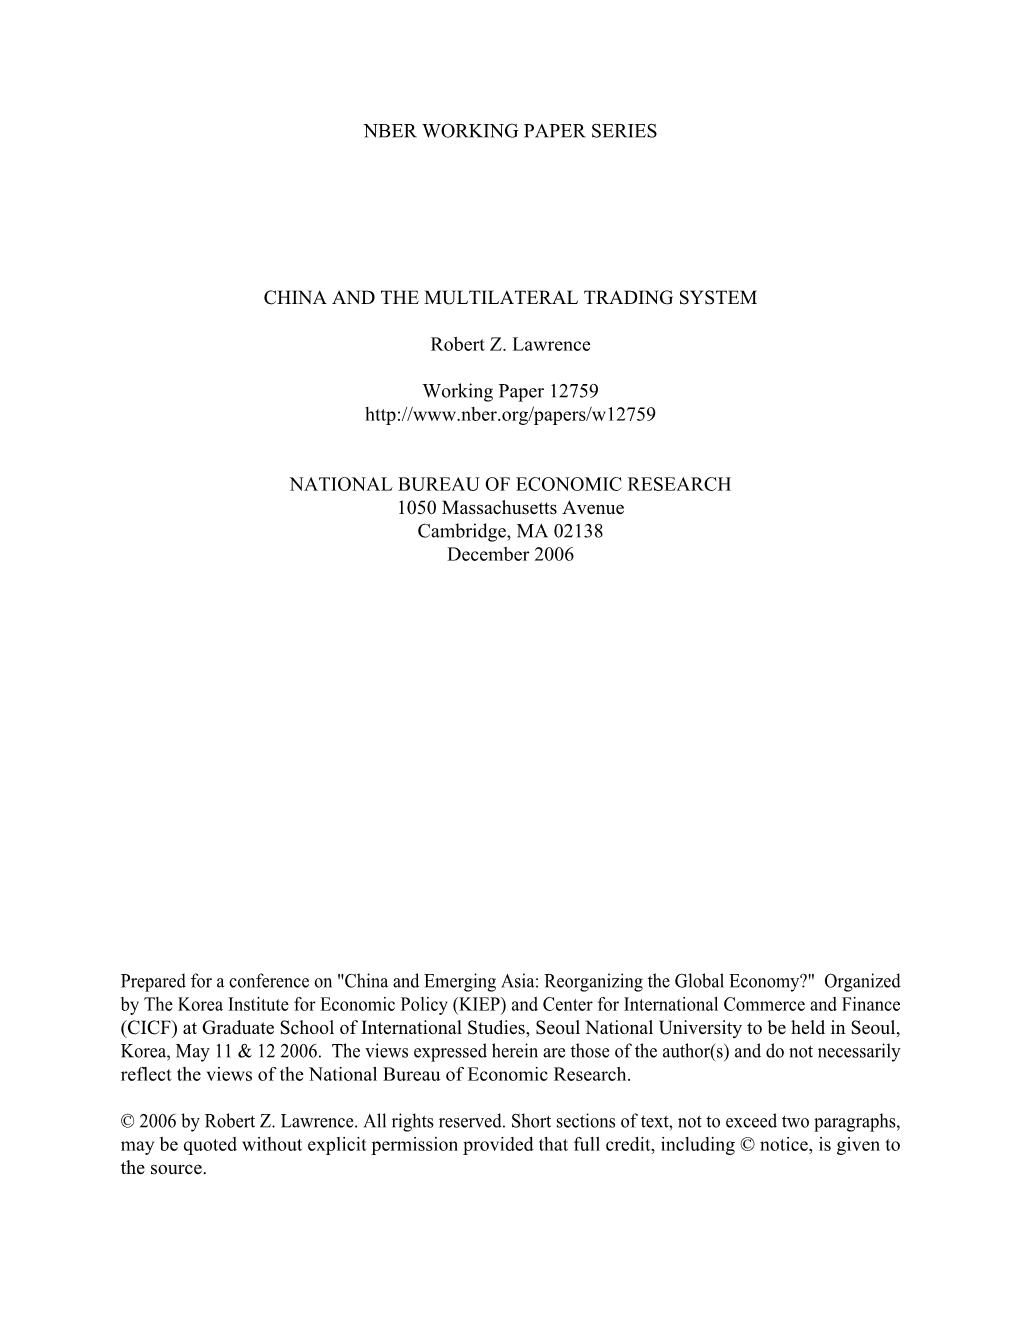 Nber Working Paper Series China and the Multilateral Trading System